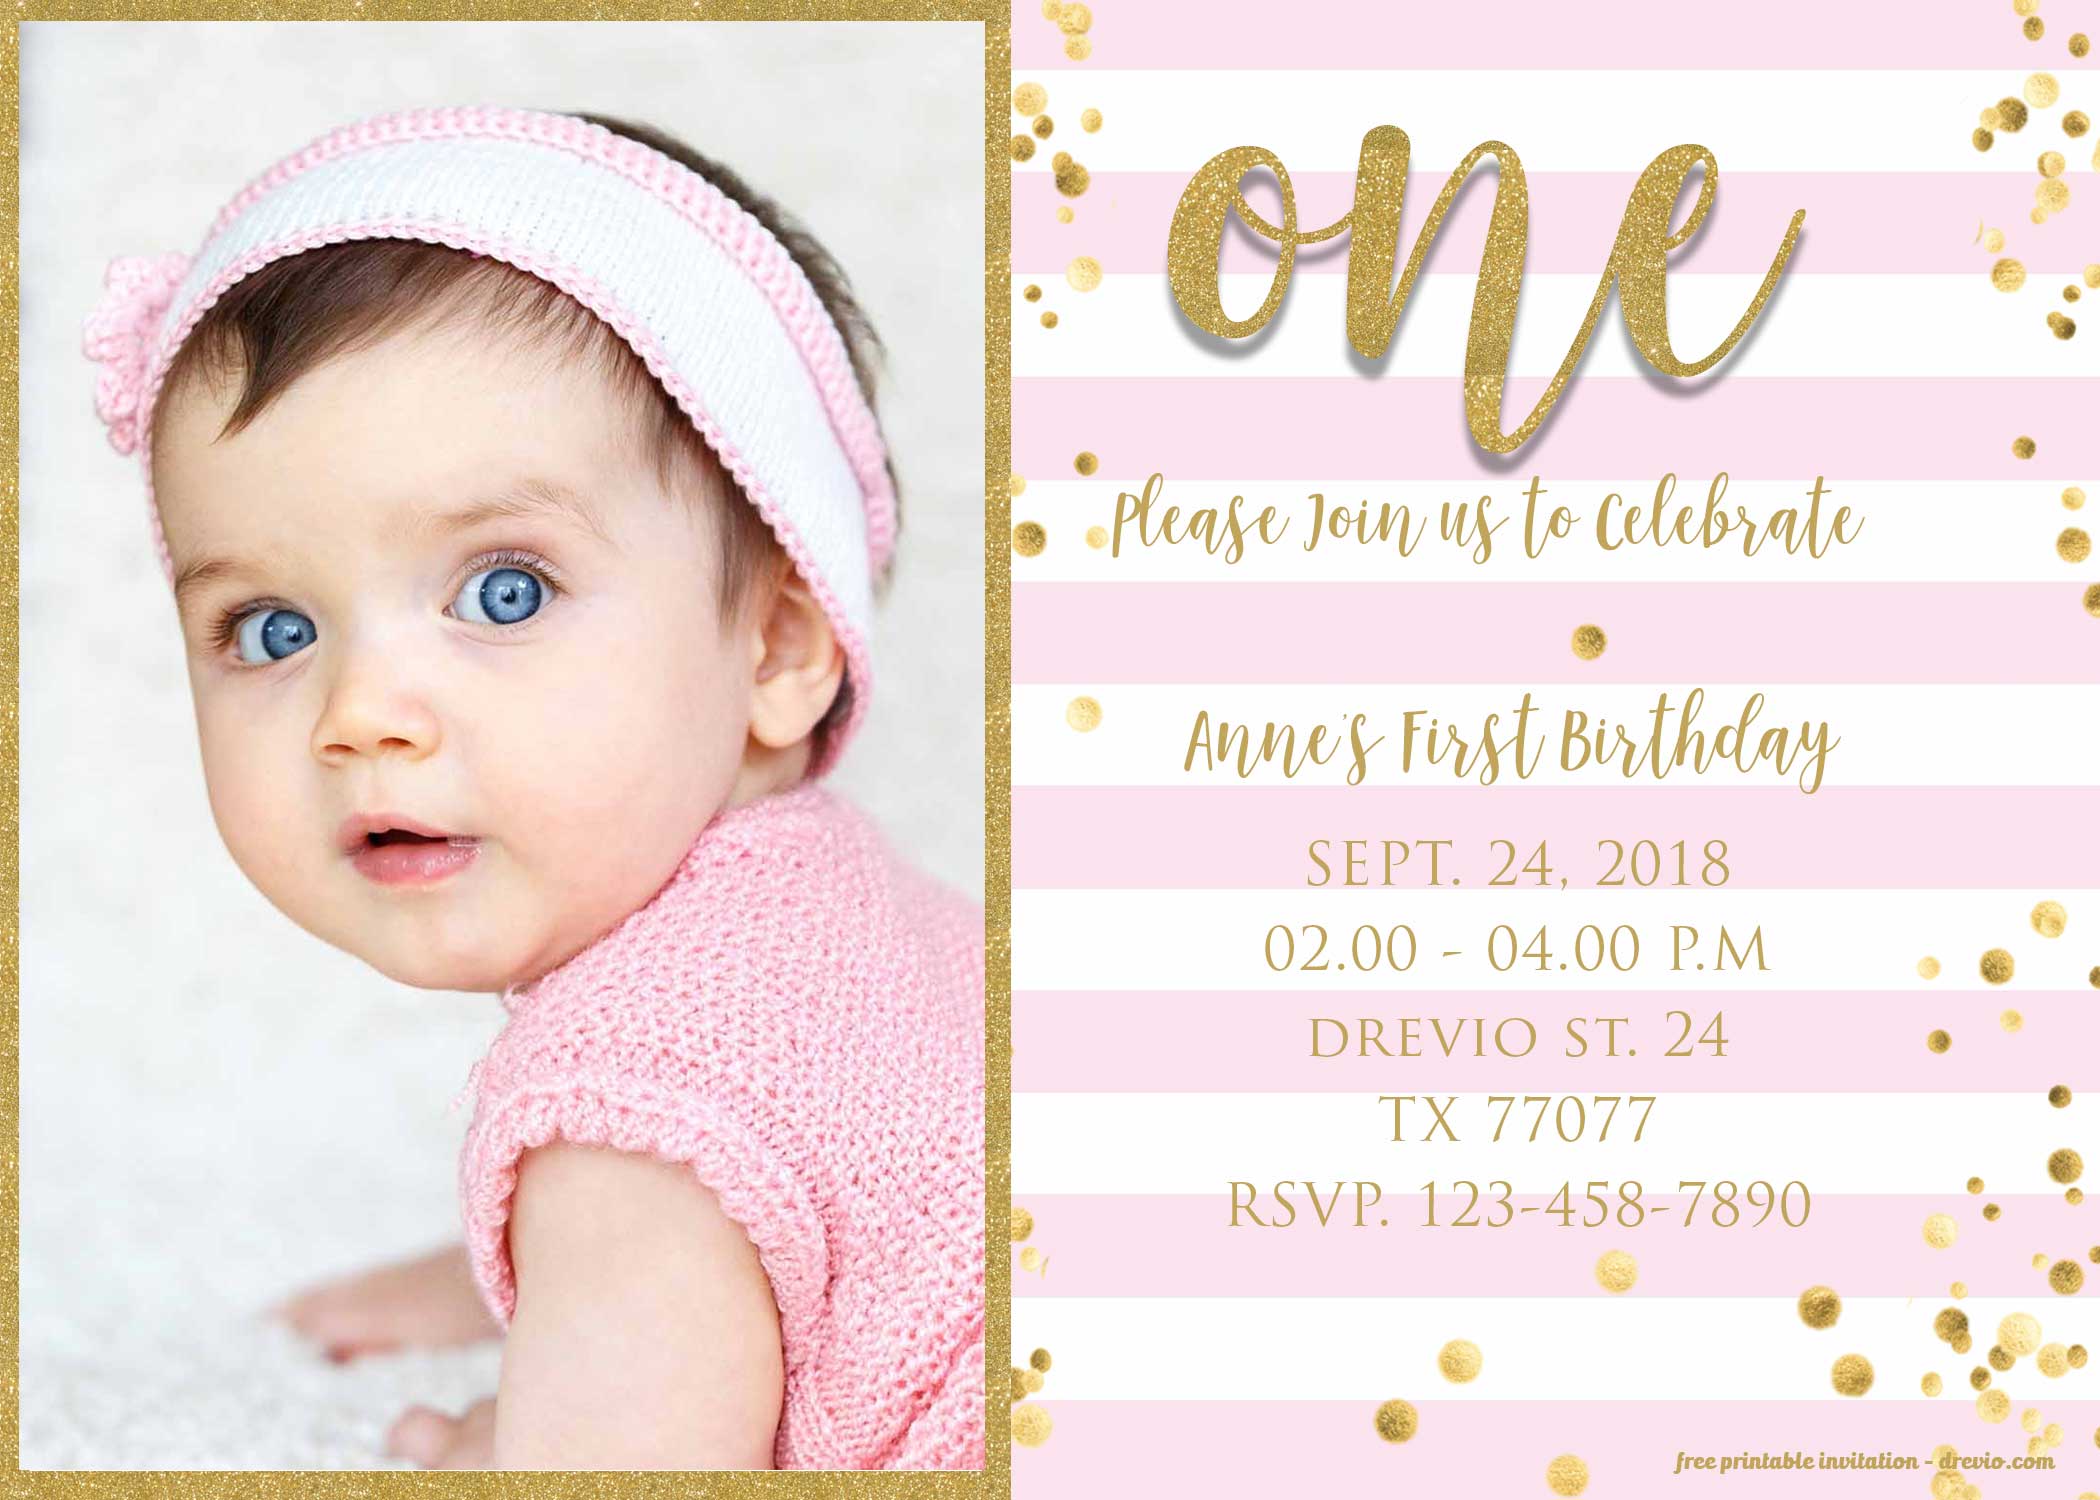 free-first-birthday-invitation-girl-pink-and-gold-glitter-invitation-template-preview-download